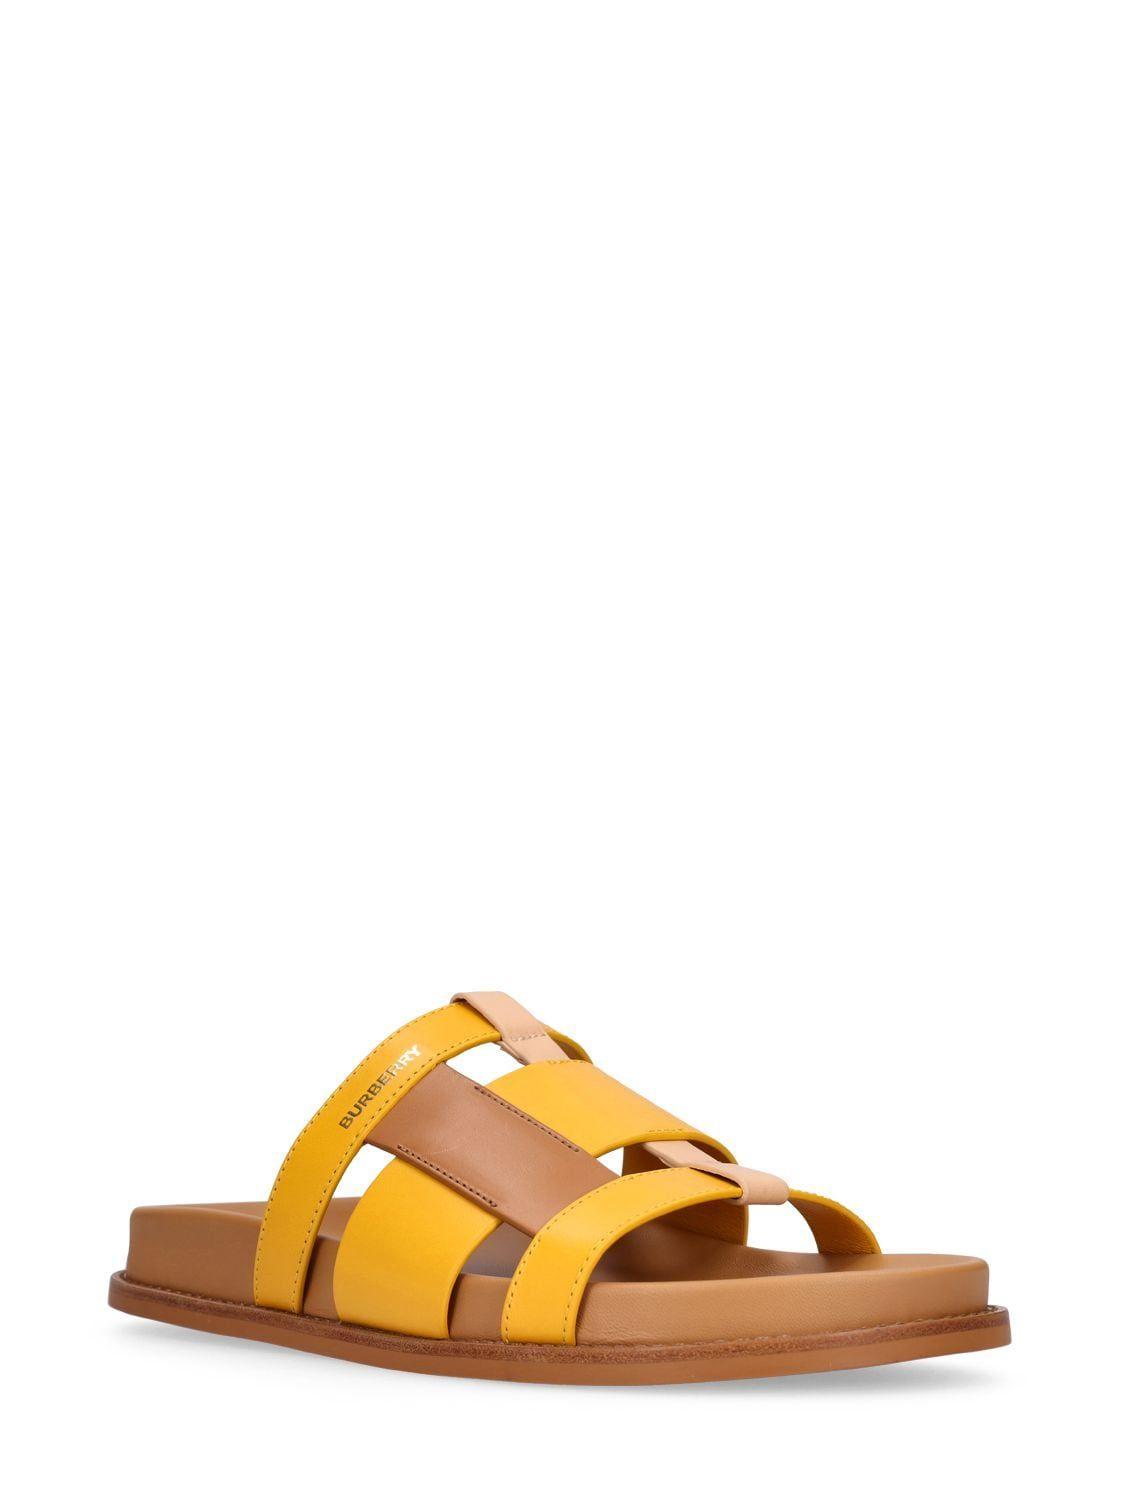 Burberry 10mm Thelma Leather Sandals in Orange | Lyst